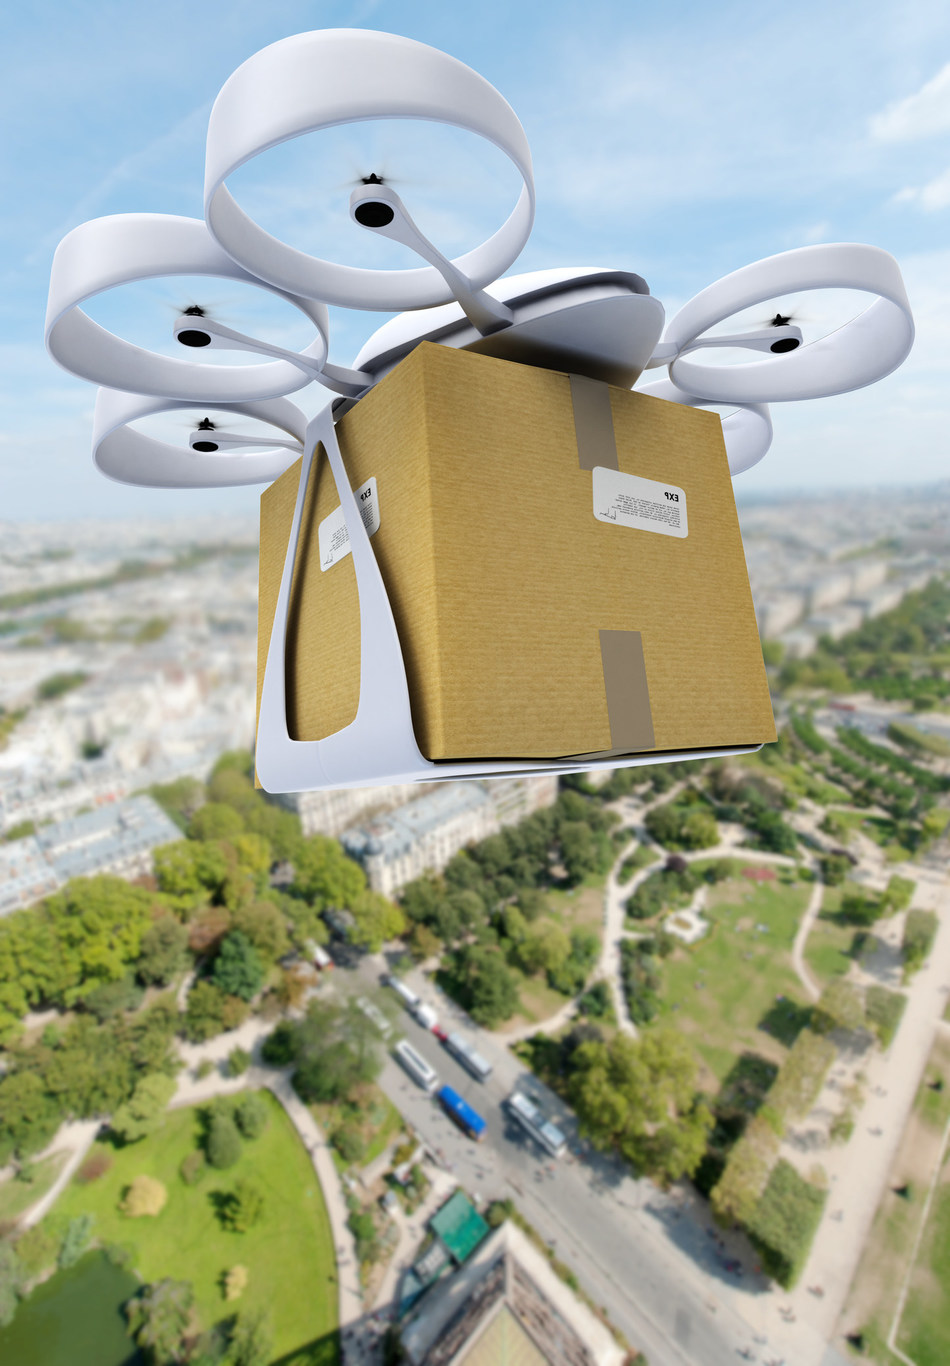 Commercial drone delivery